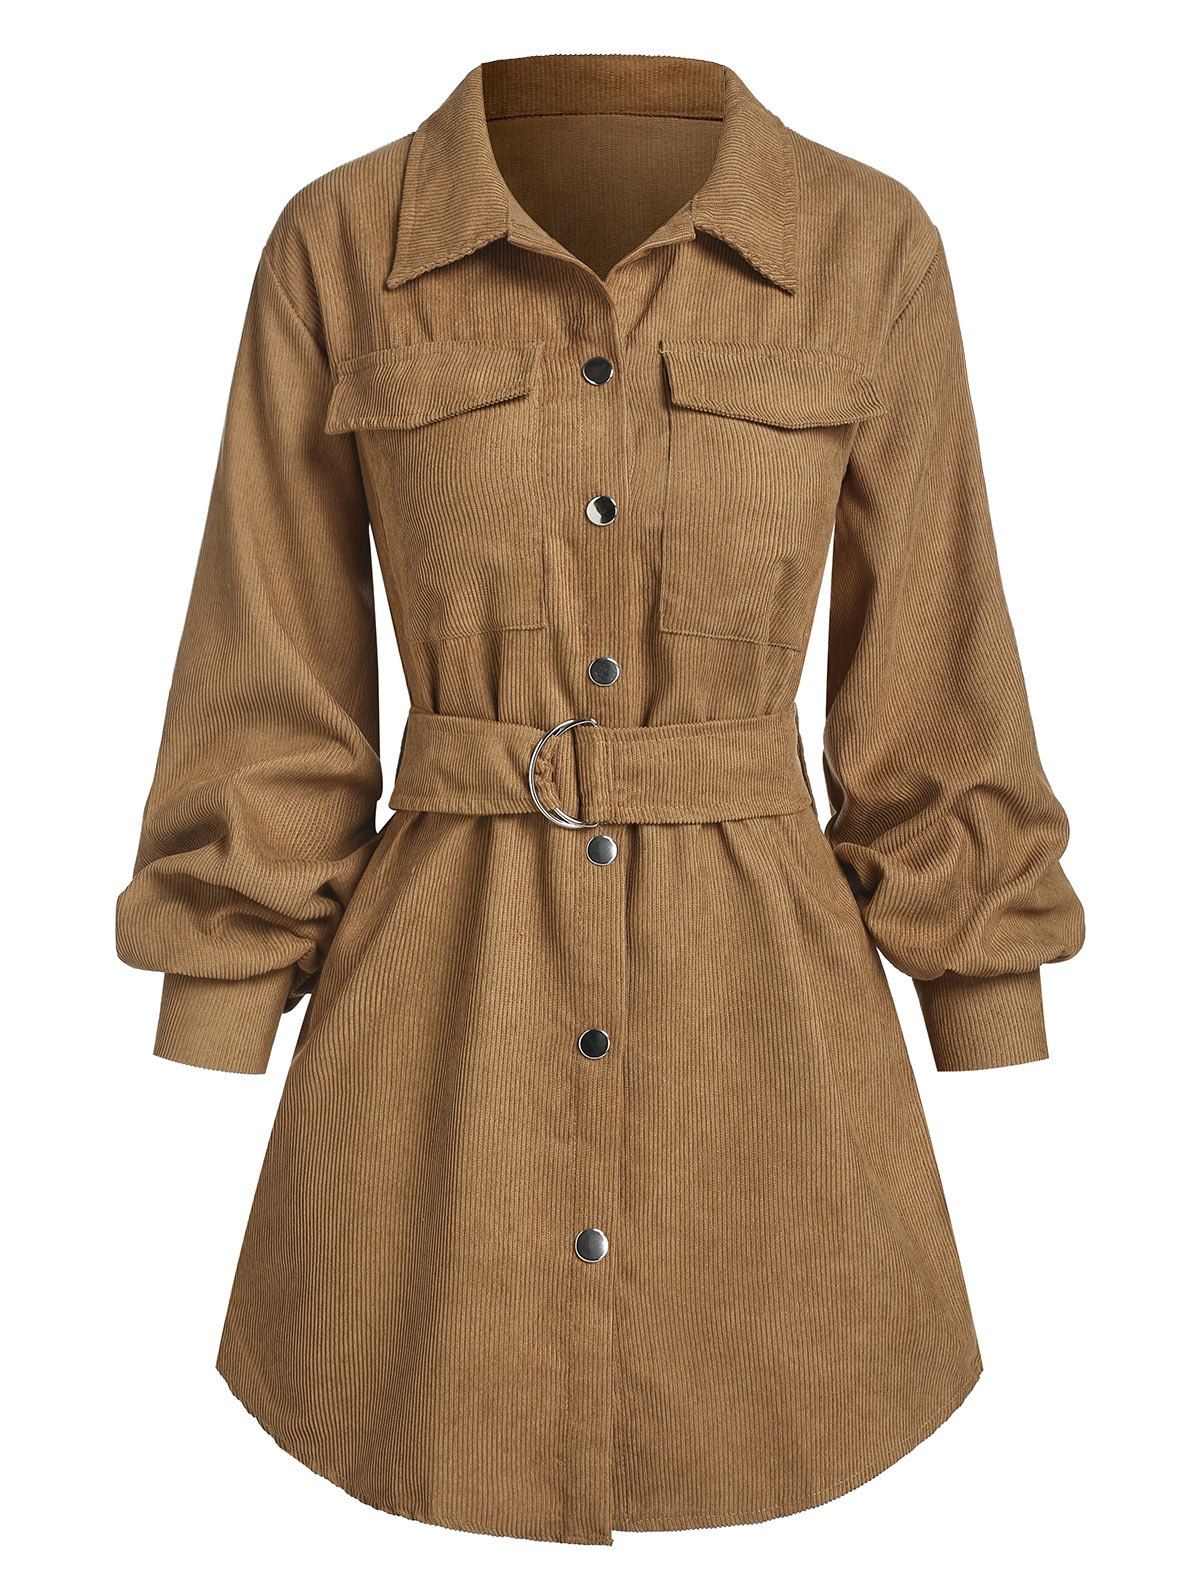 Button Up Corduroy Belted Coat - COFFEE XL